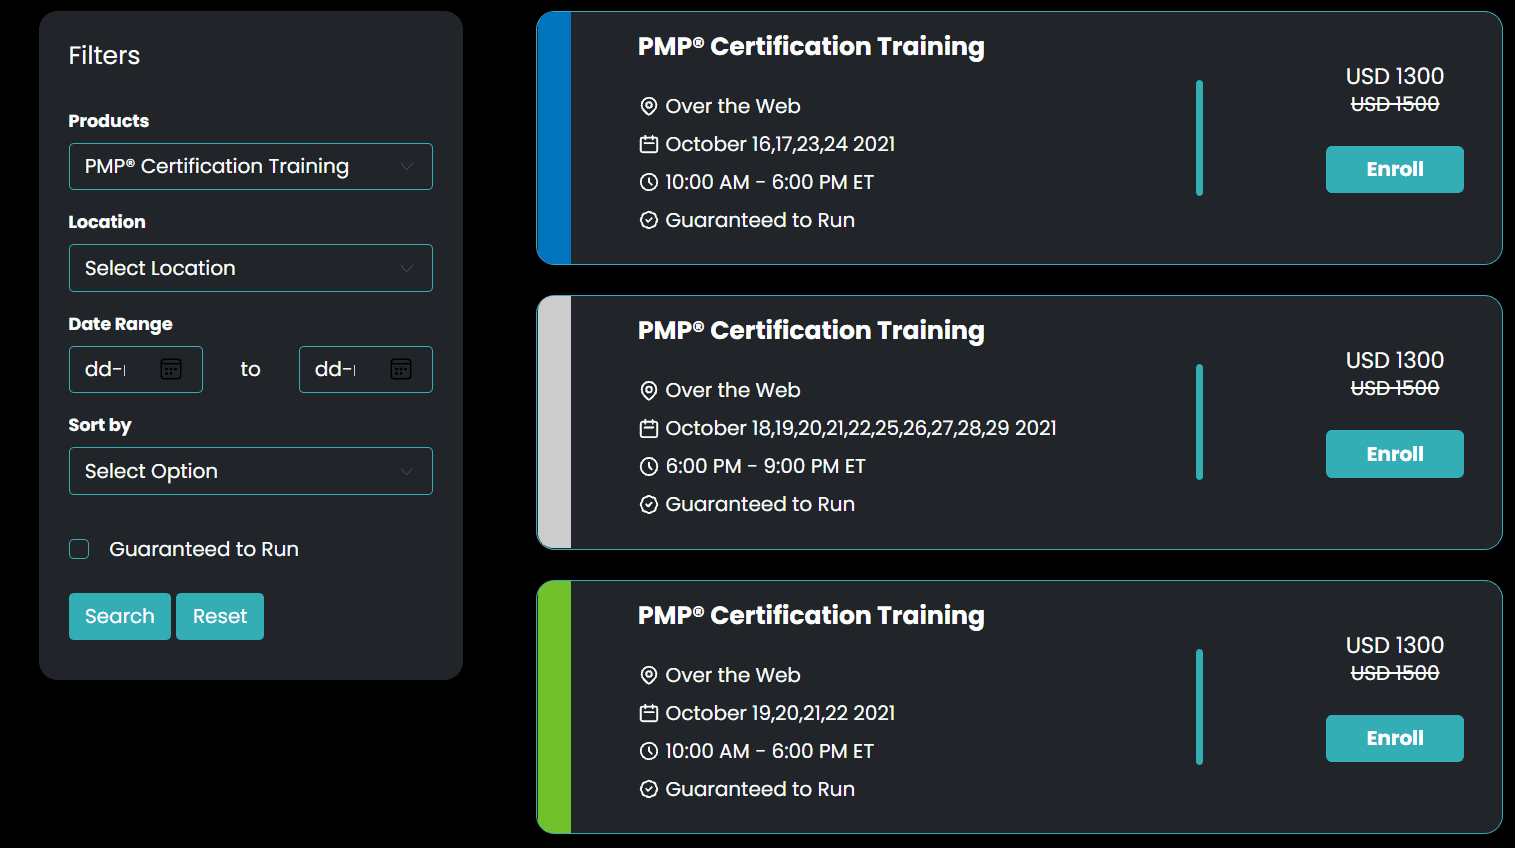 PMP Certification Training Pricing